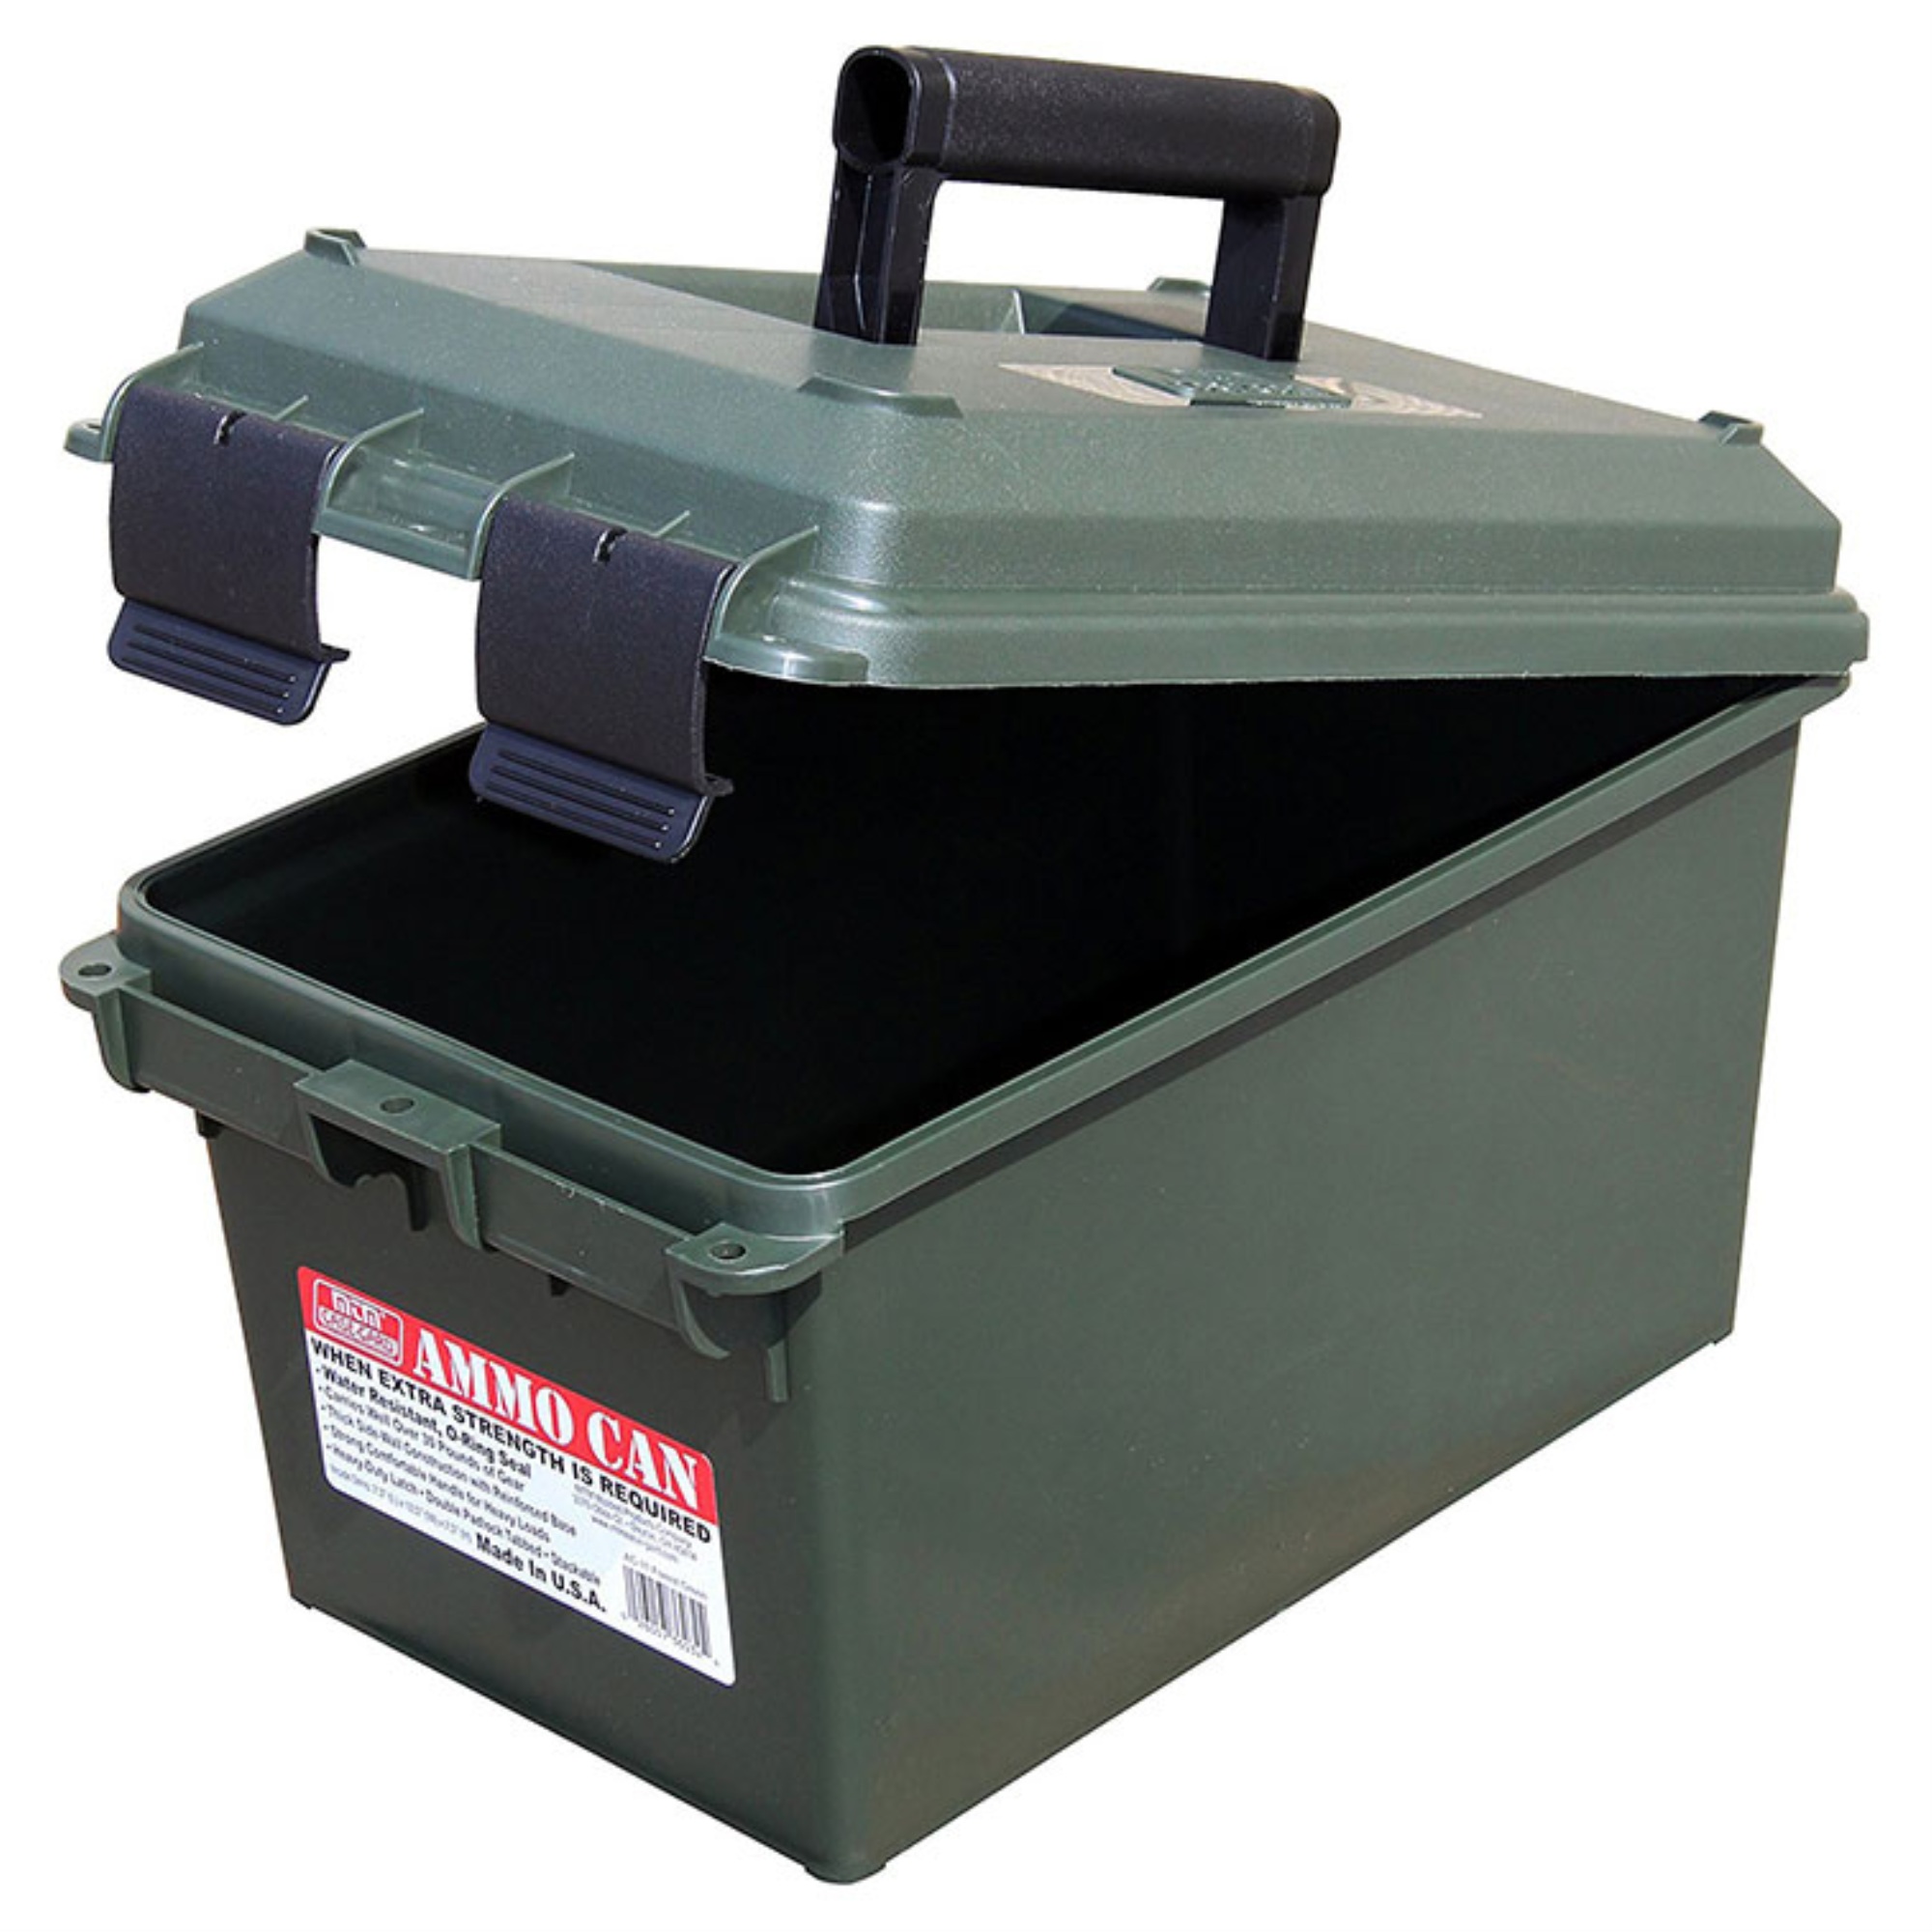 MTM Rugged Plastic Ammunition Can W/ O-Ring Seal for Water Resistance, Green, 6" x 5" x 7" - image 1 of 2